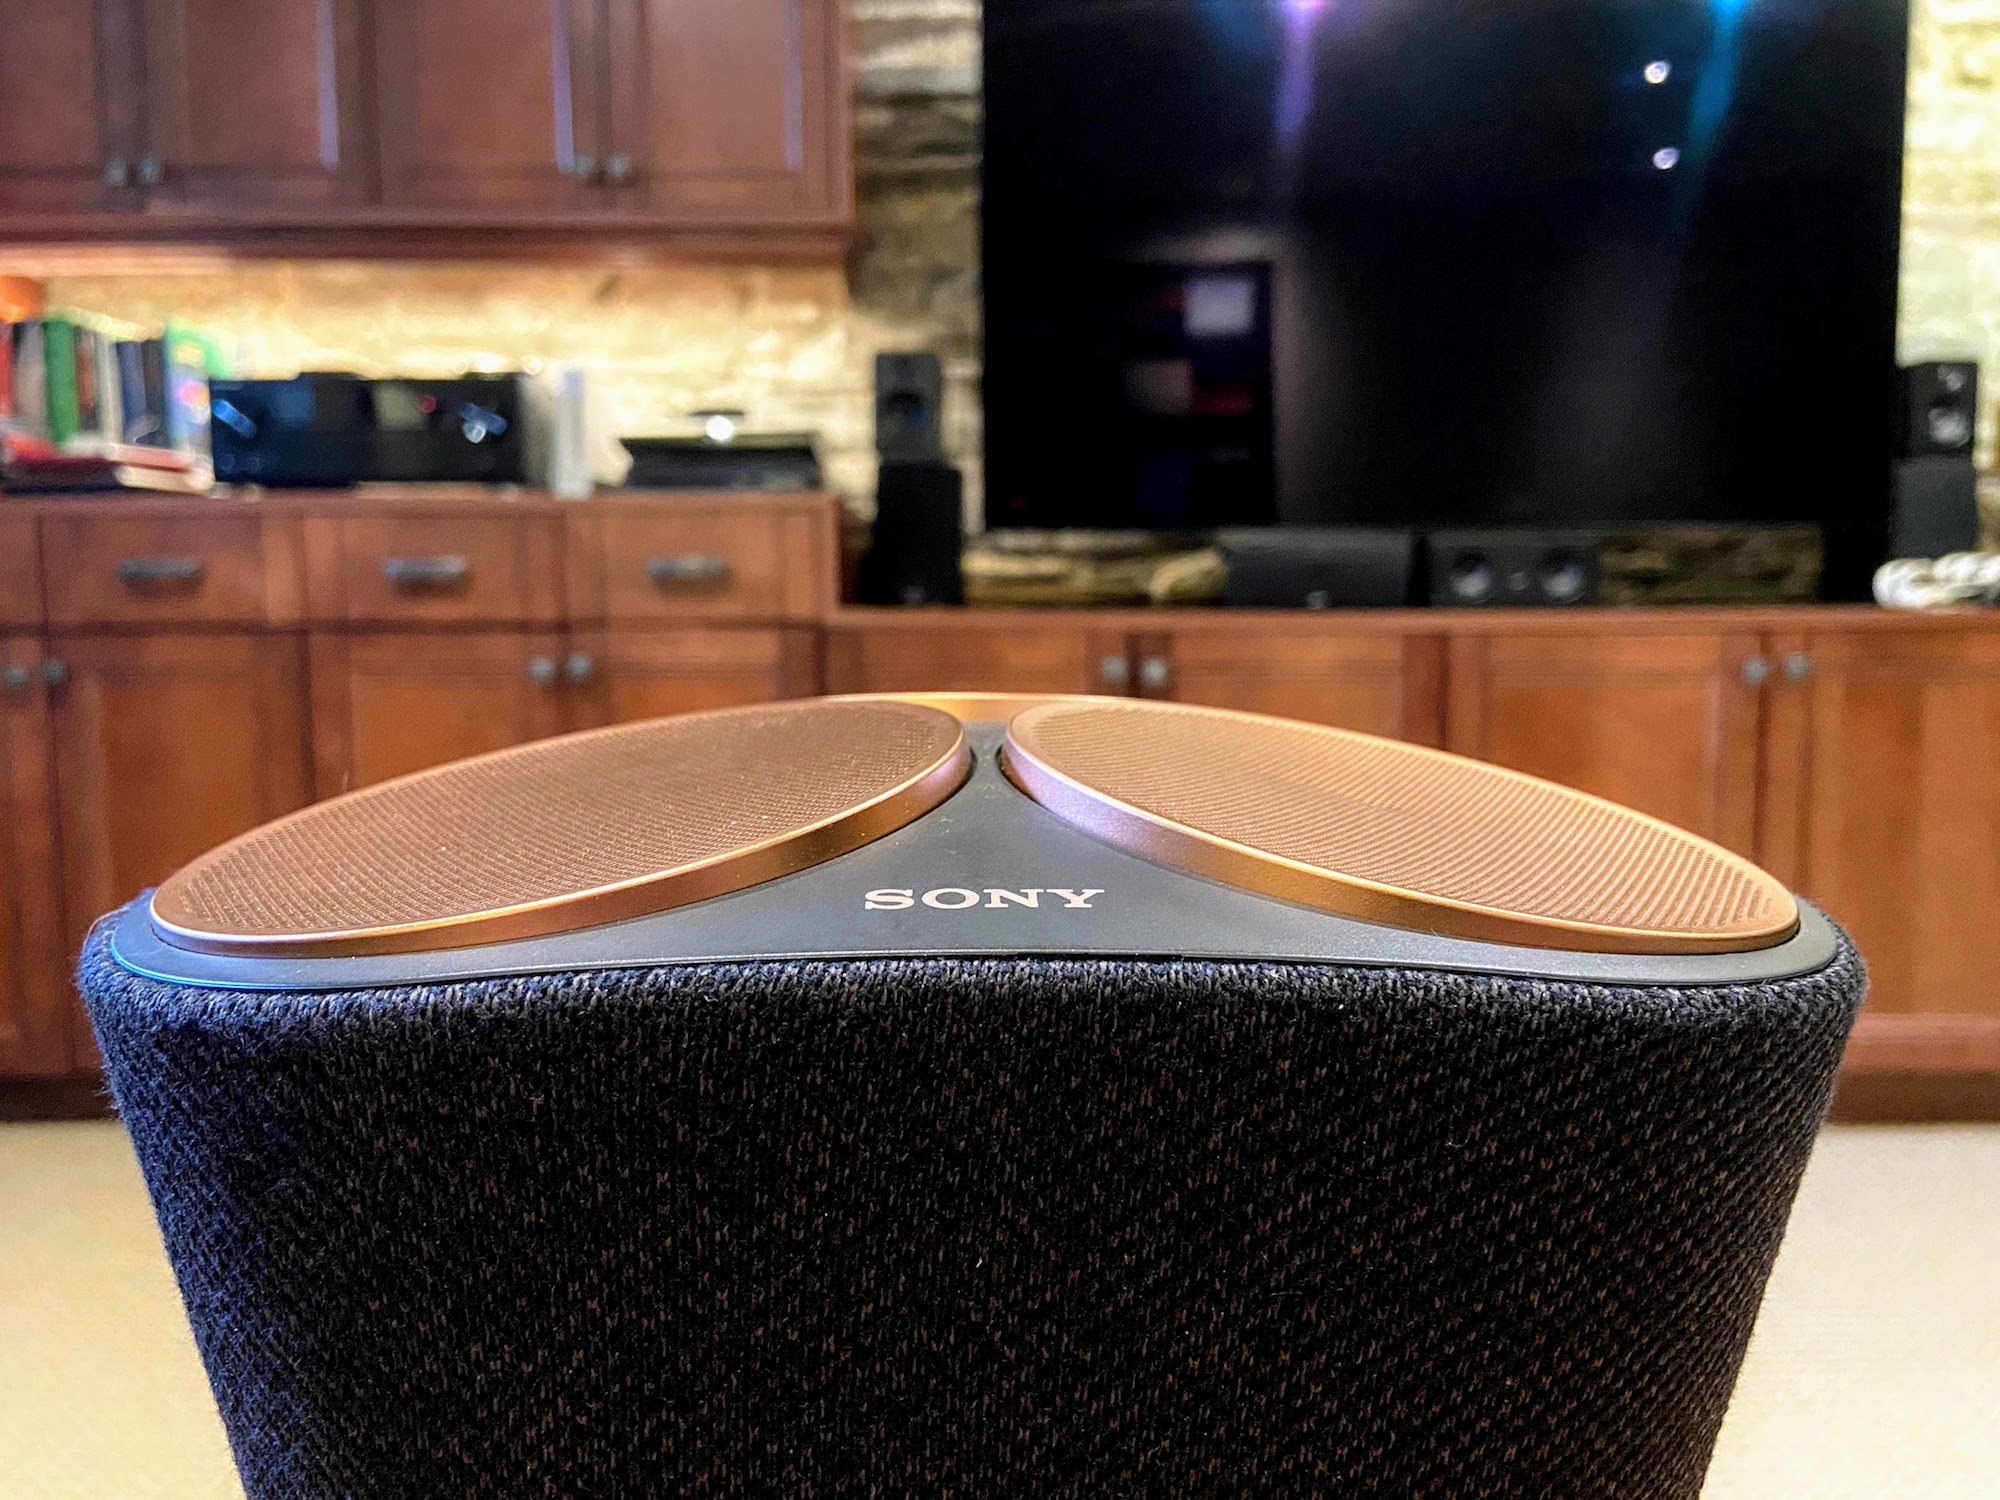 Sony SRS-RA5000 360 Speaker Review: An Expensive Experiment